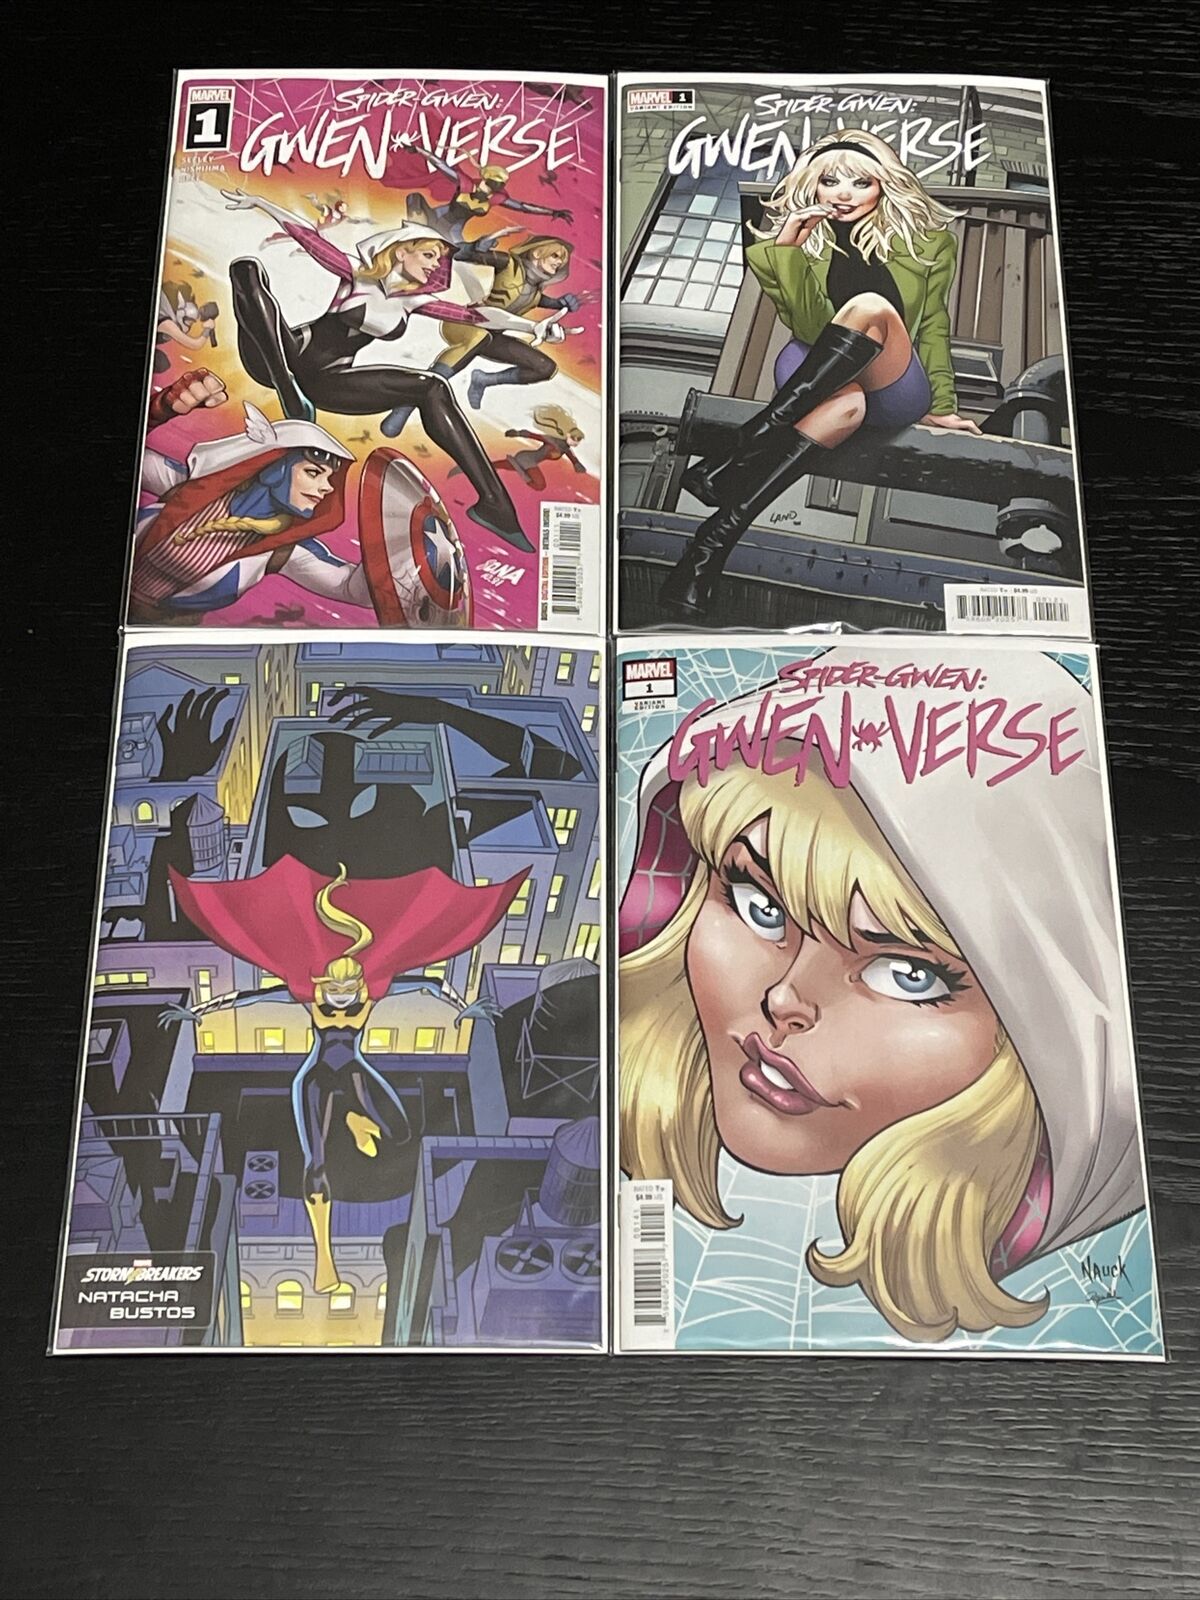 🚨 Spider-Gwen Spiderverse #1 Variant Cover Lot Stormbreakers Nauck Homage 🚨